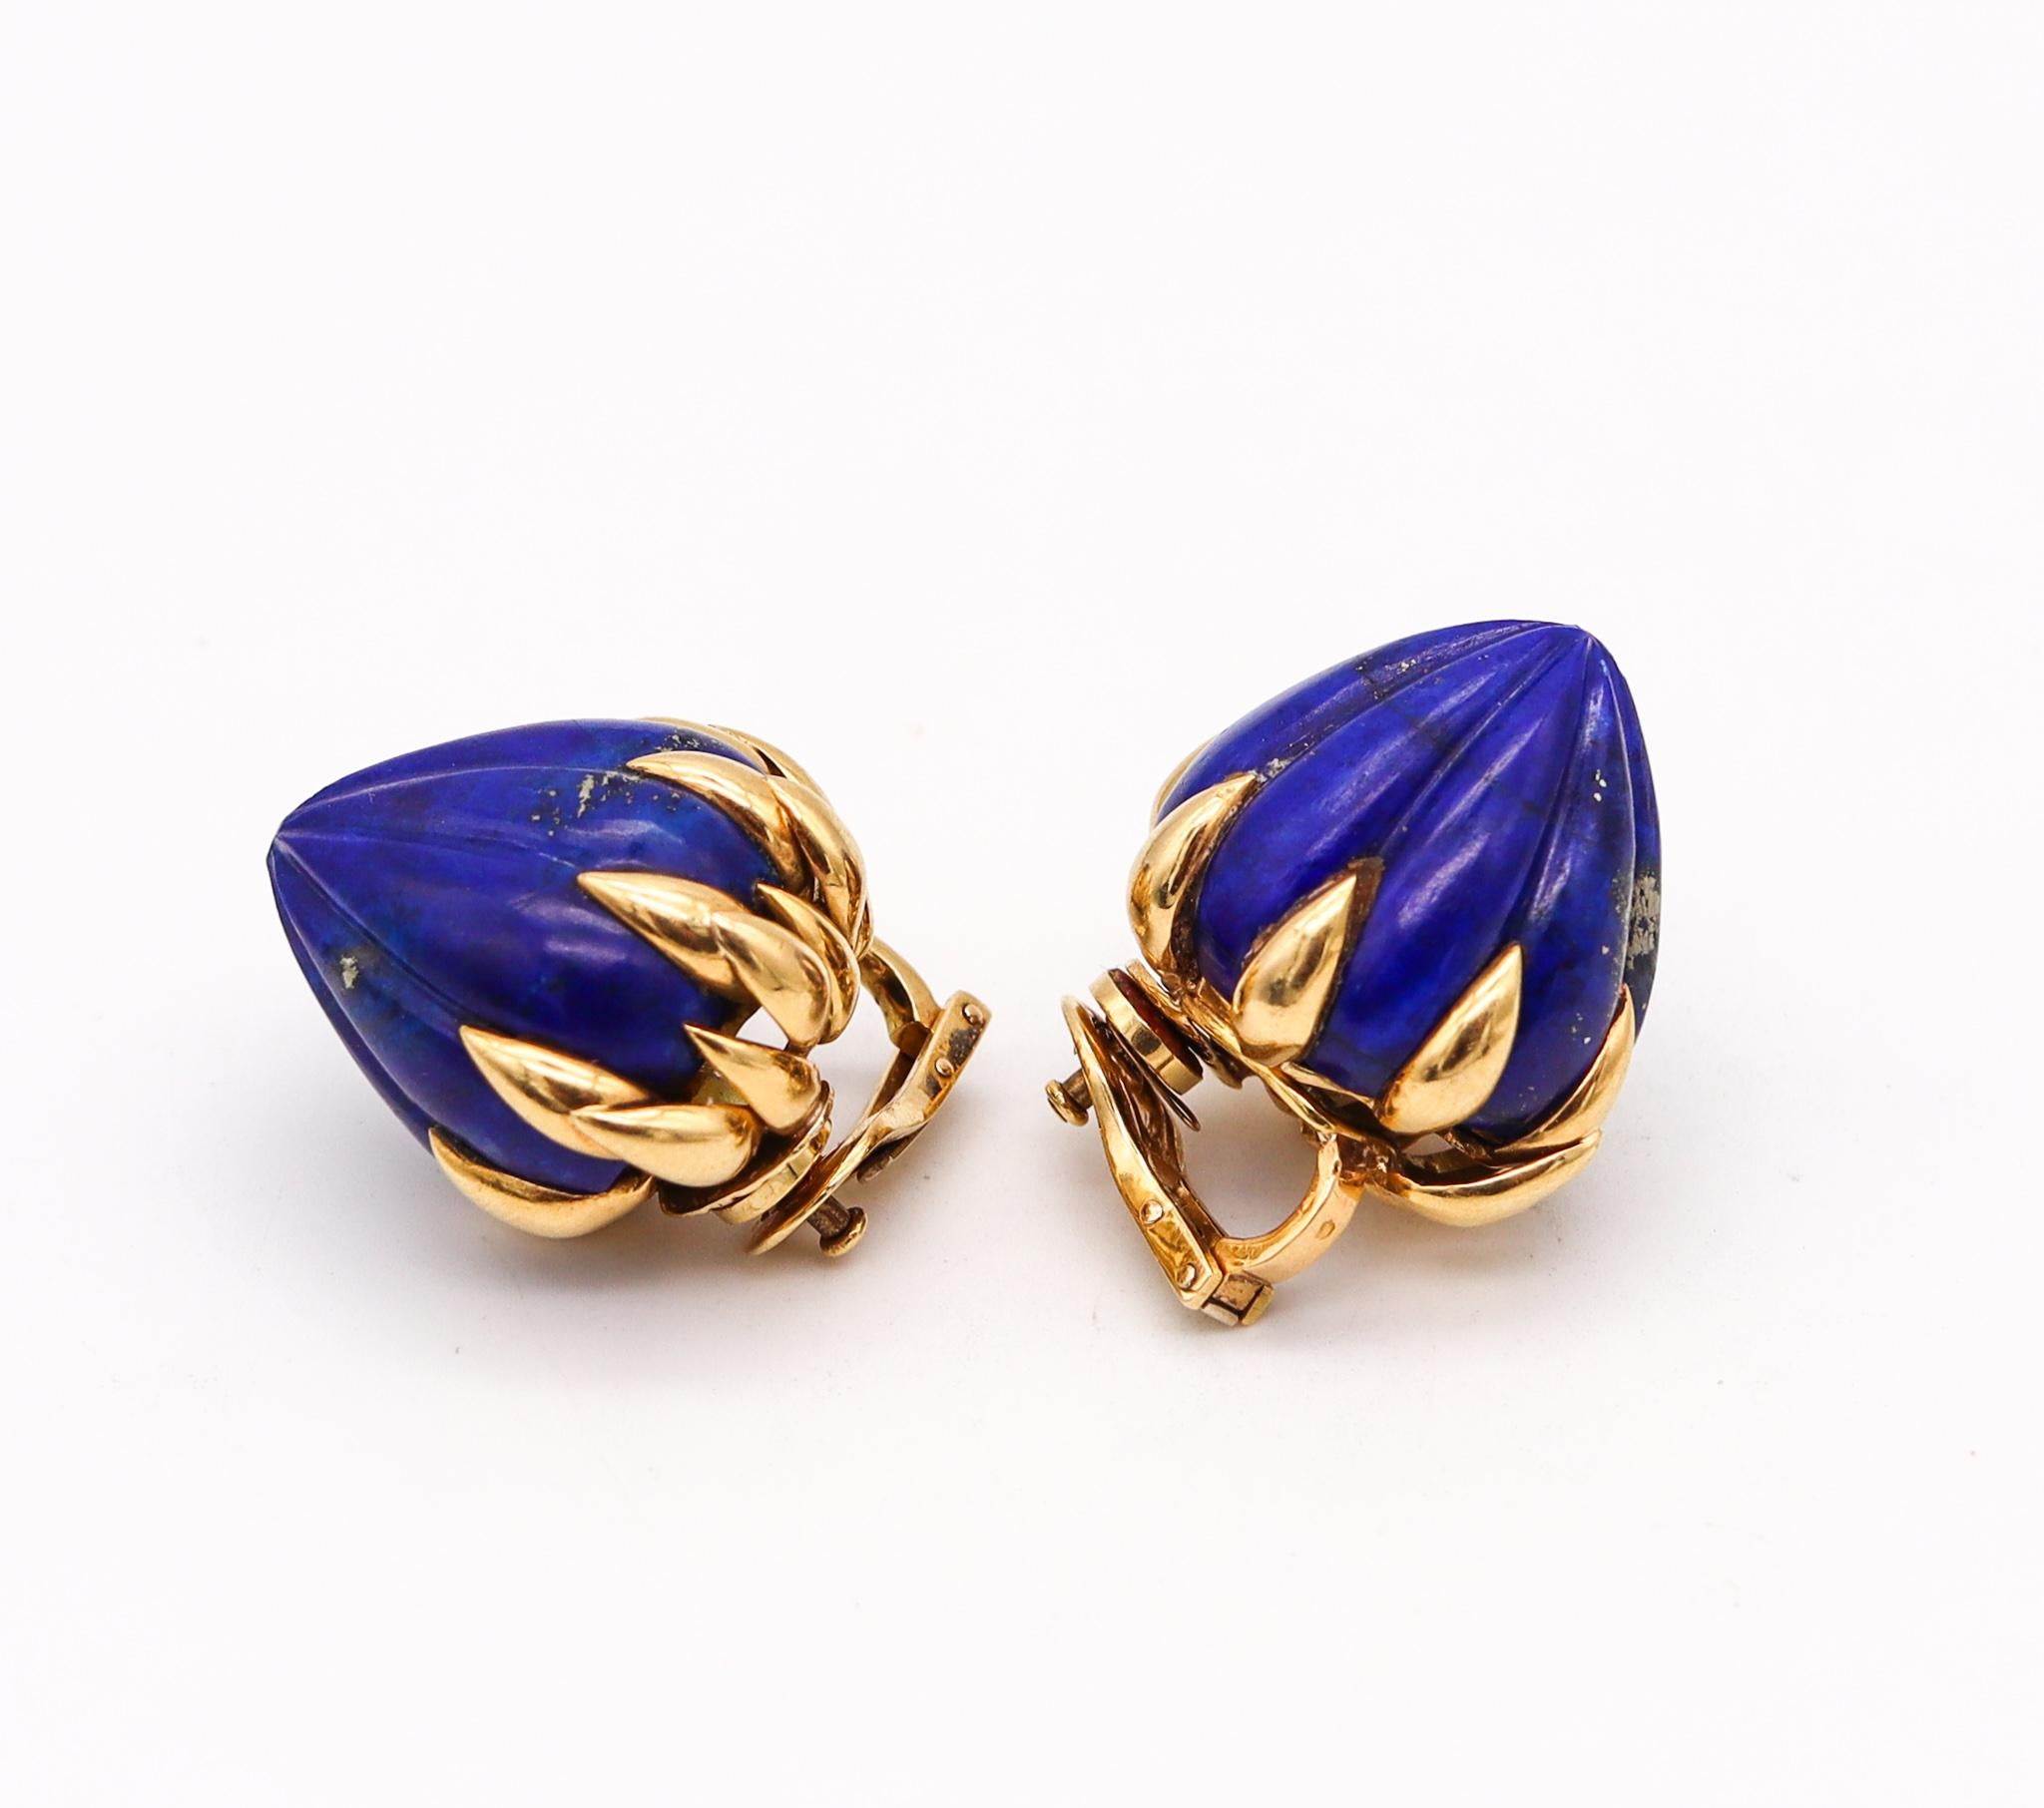 Cabochon Pierre Sterle 1960 Retro Modern Clip on Earring in 18kt Yellow Gold with Lapis